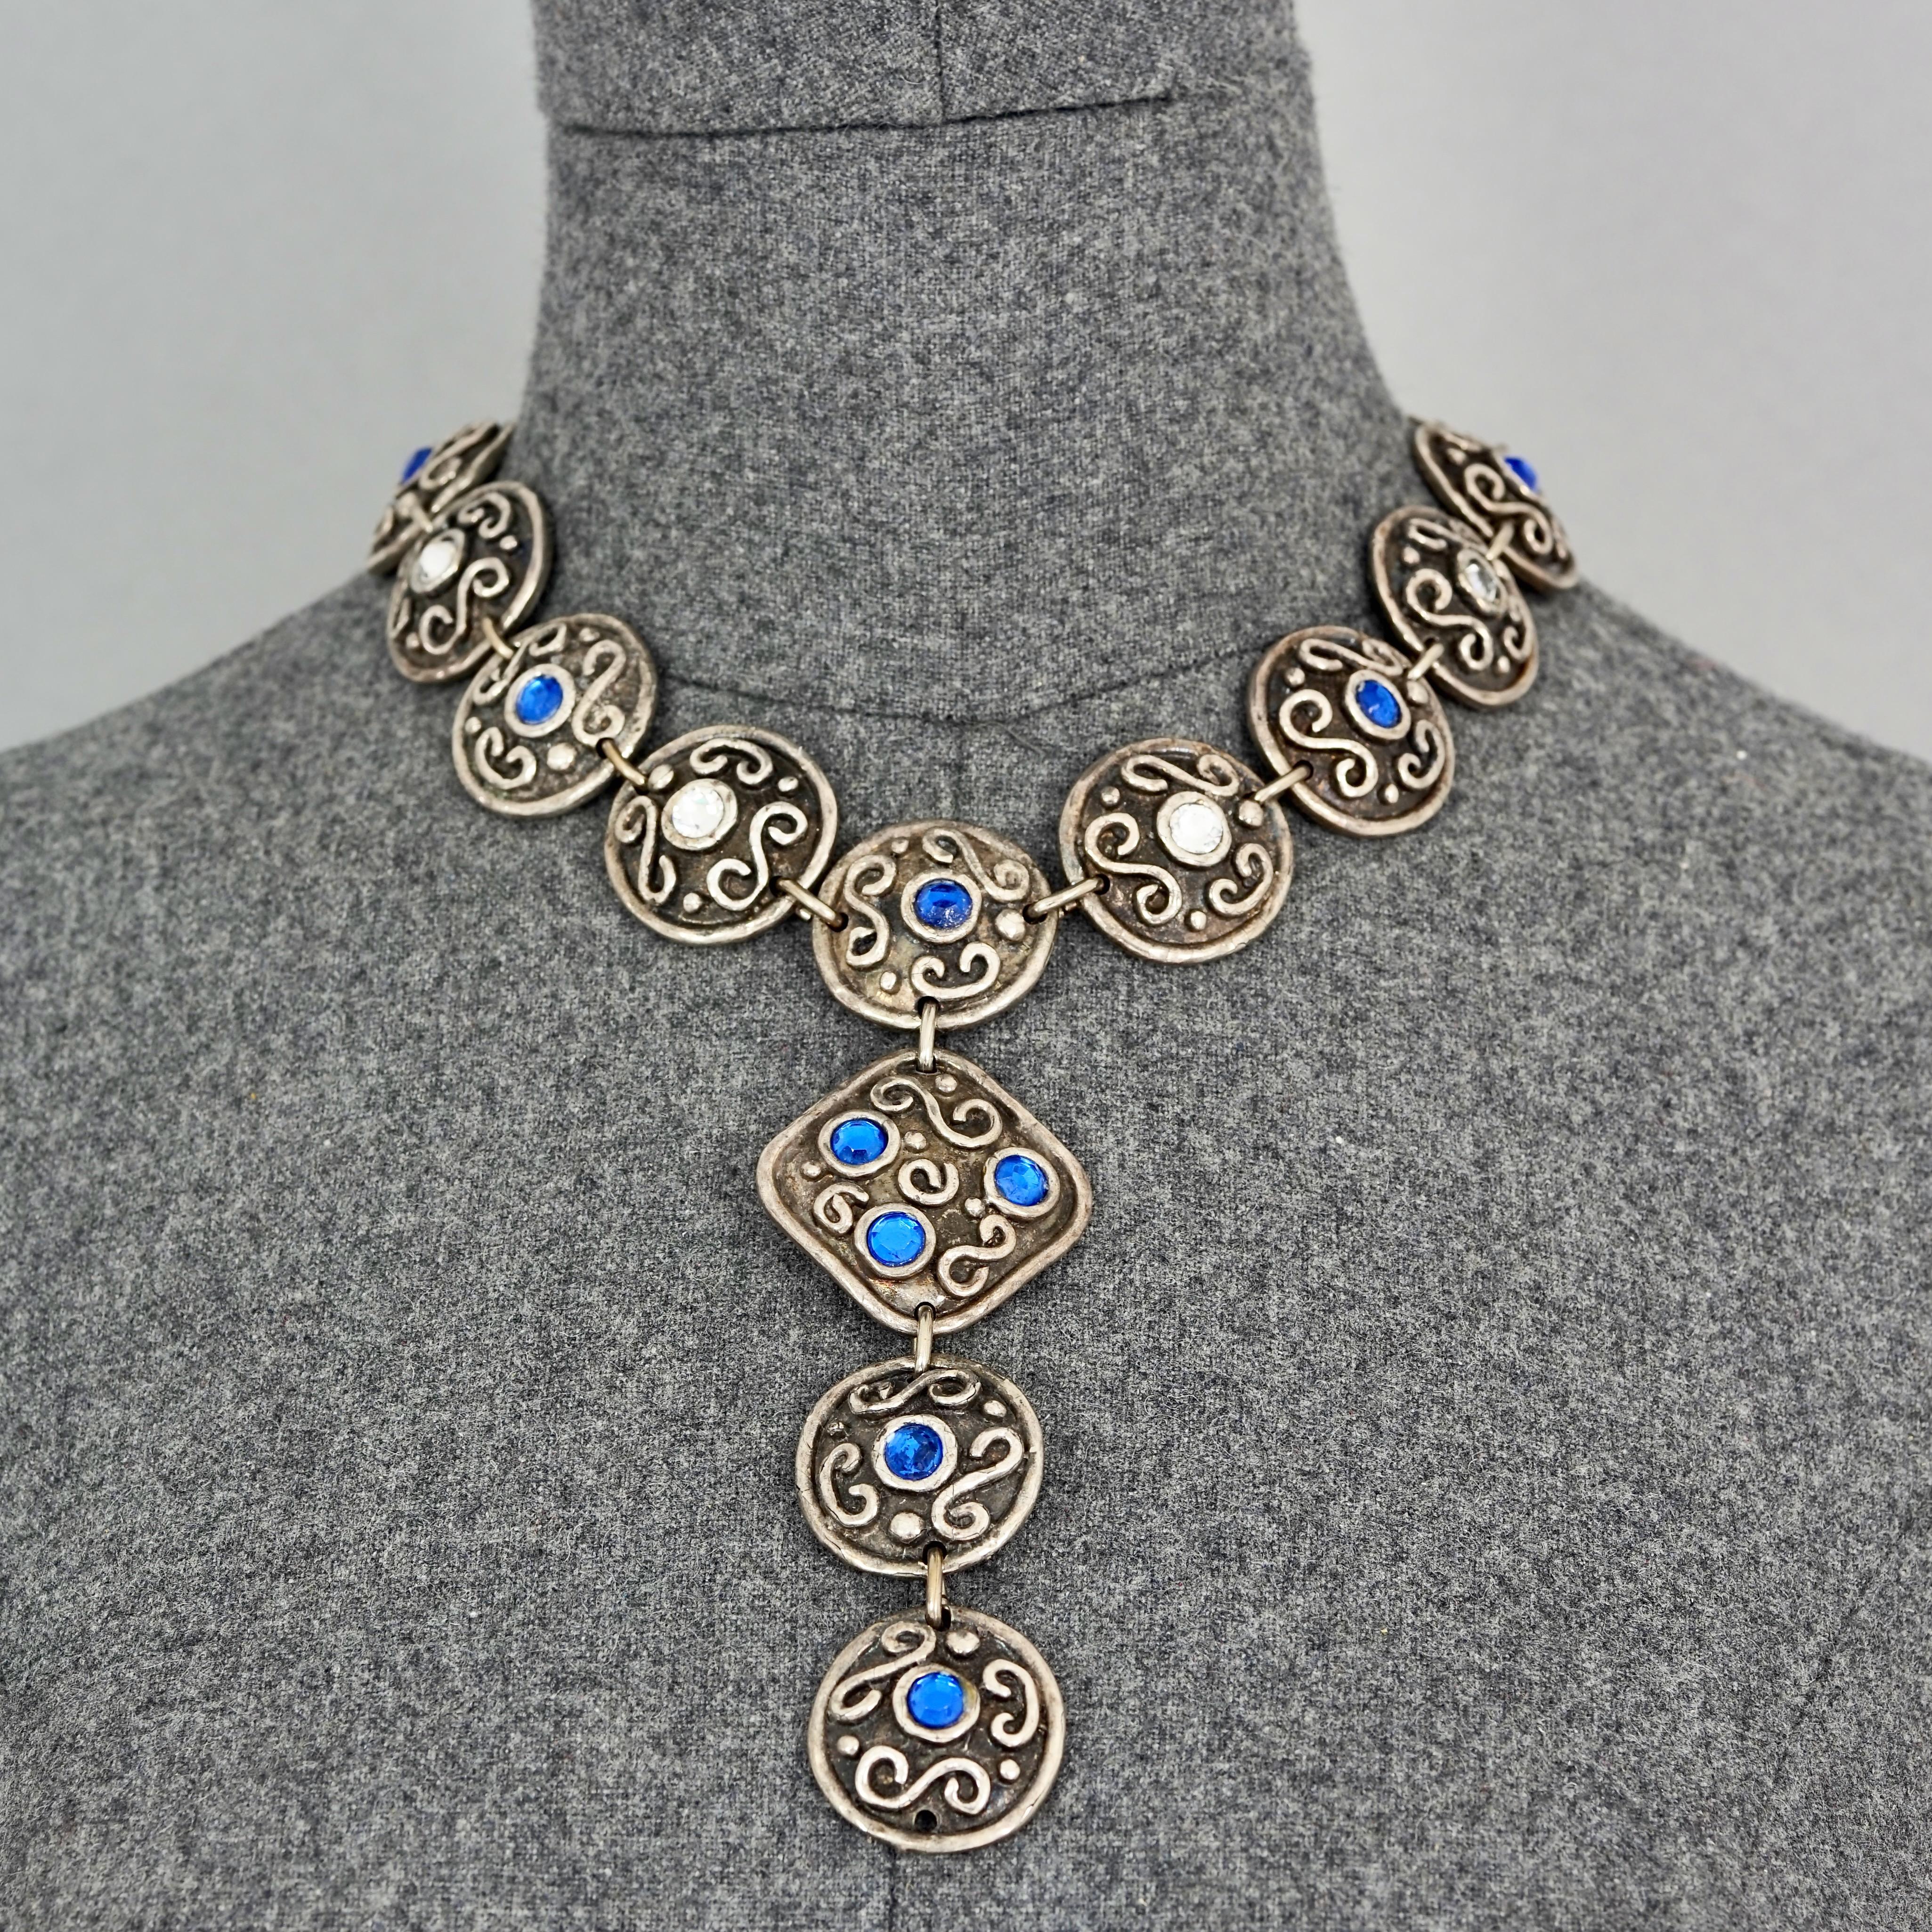 Vintage EDOUARD RAMBAUD Ethnic Jewelled Disc Link Necklace

Measurements:
Centrepiece Height: 5.11 inches (13 cm)
Discs: 1.10 inches (2.8 cm)
Overall Length: 17.12 inches to 19.48 inches (43.5 cm to 49.5 cm)

Features:
- 100% Authentic EDOUARD